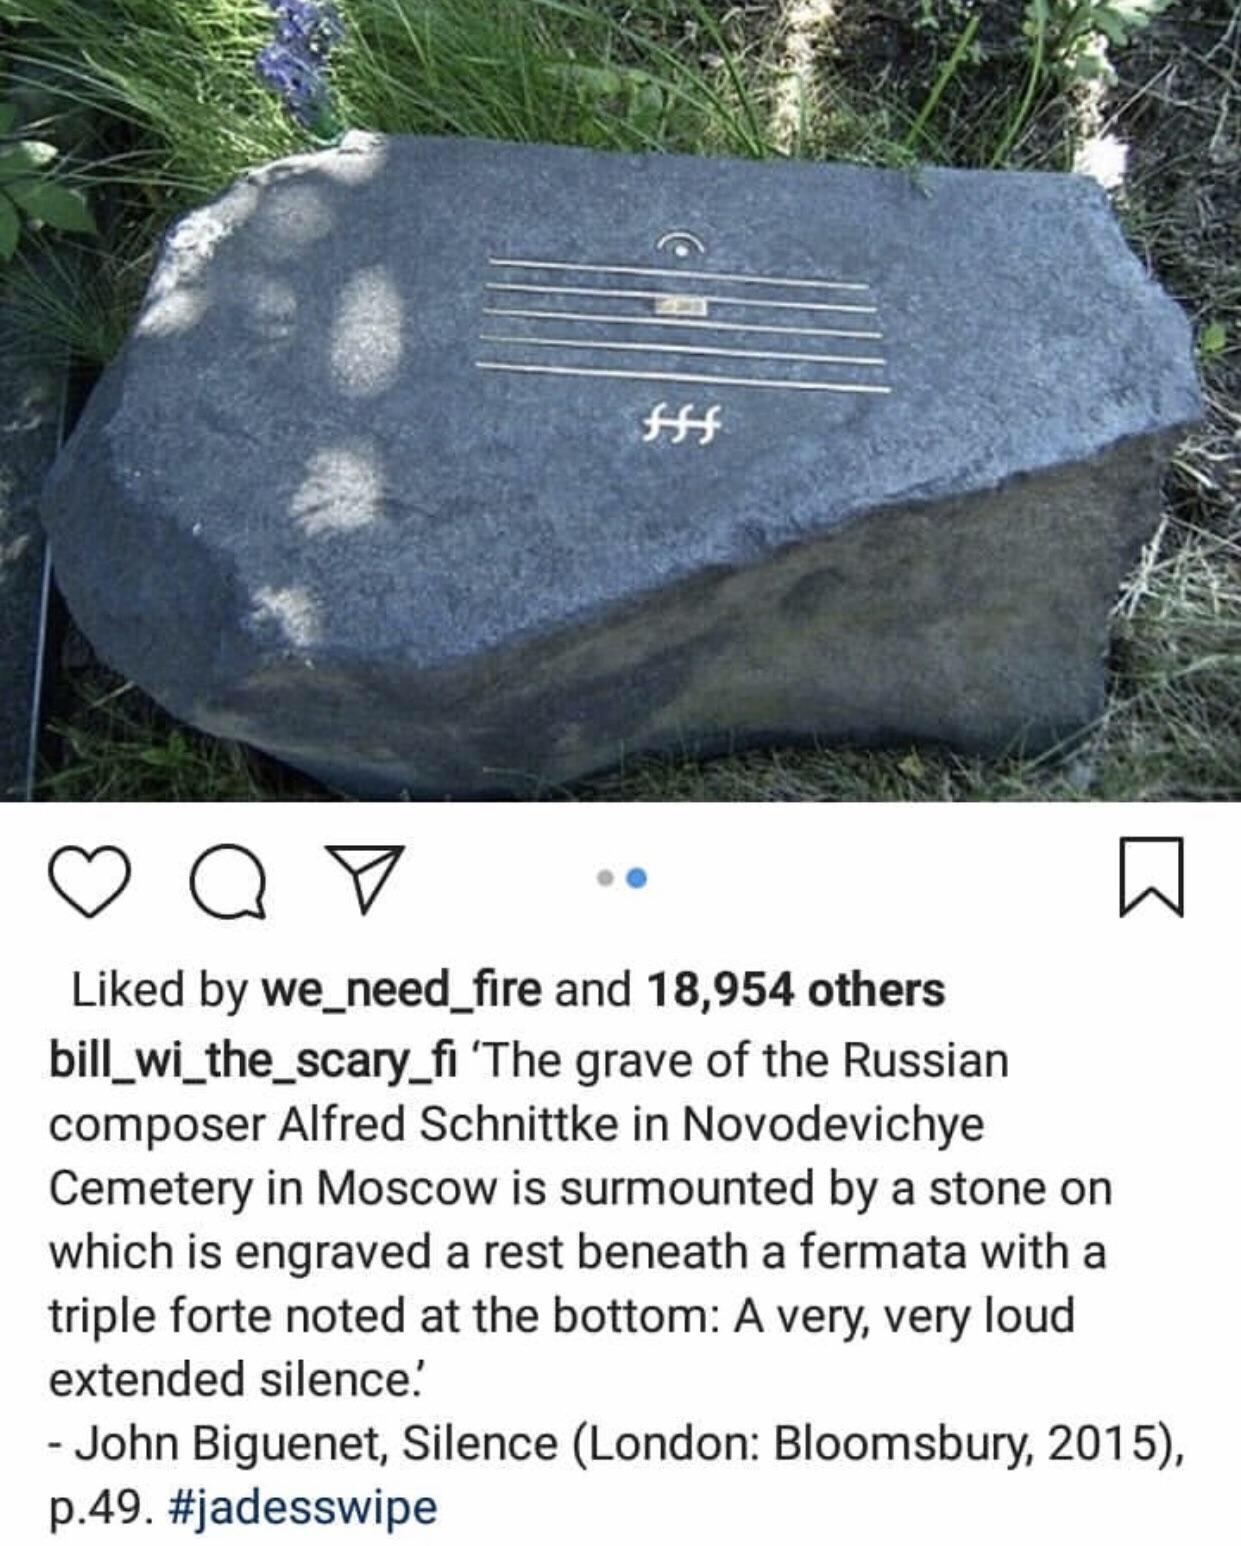 Grave of Russian composer Alfred Schnittke